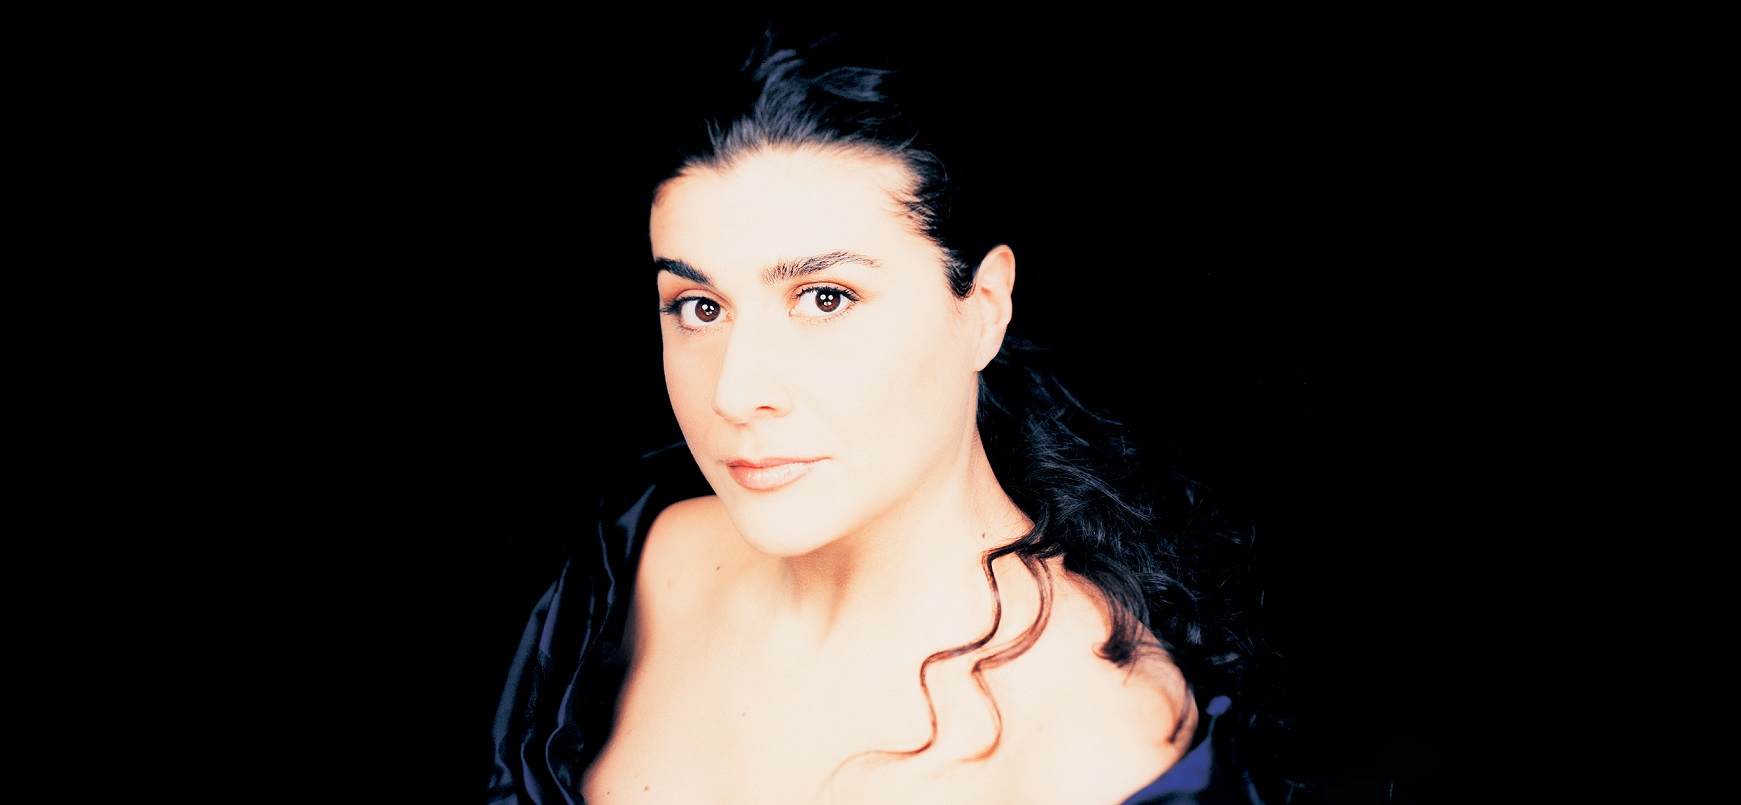 Portrait shot of singer Cecilia Bartoli against a black background. She looks directly into the camera.